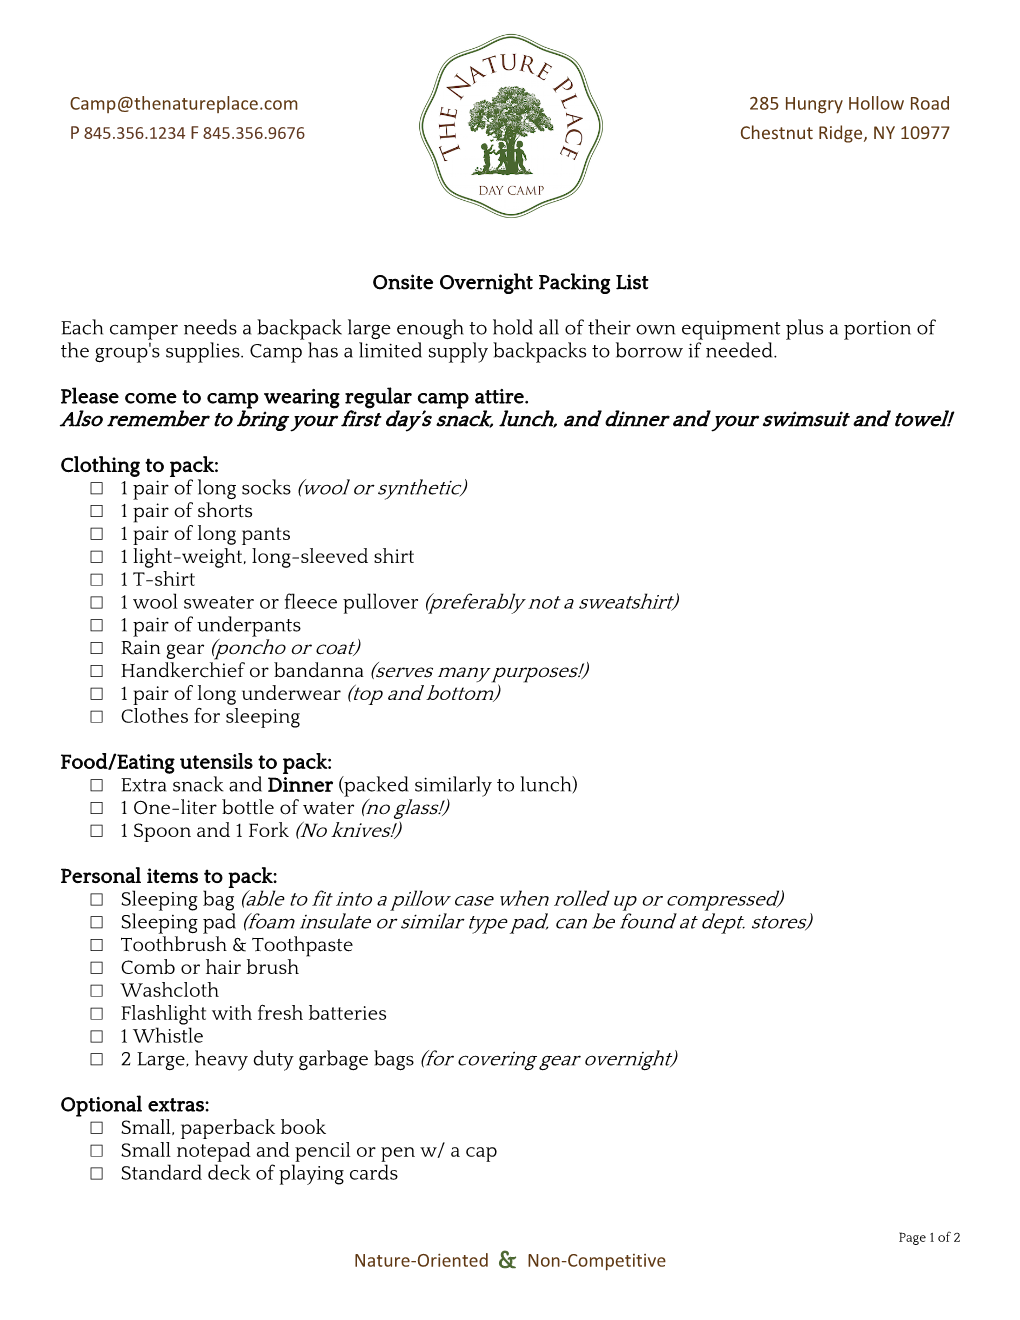 Onsite Overnight Packing List Each Camper Needs a Backpack Large